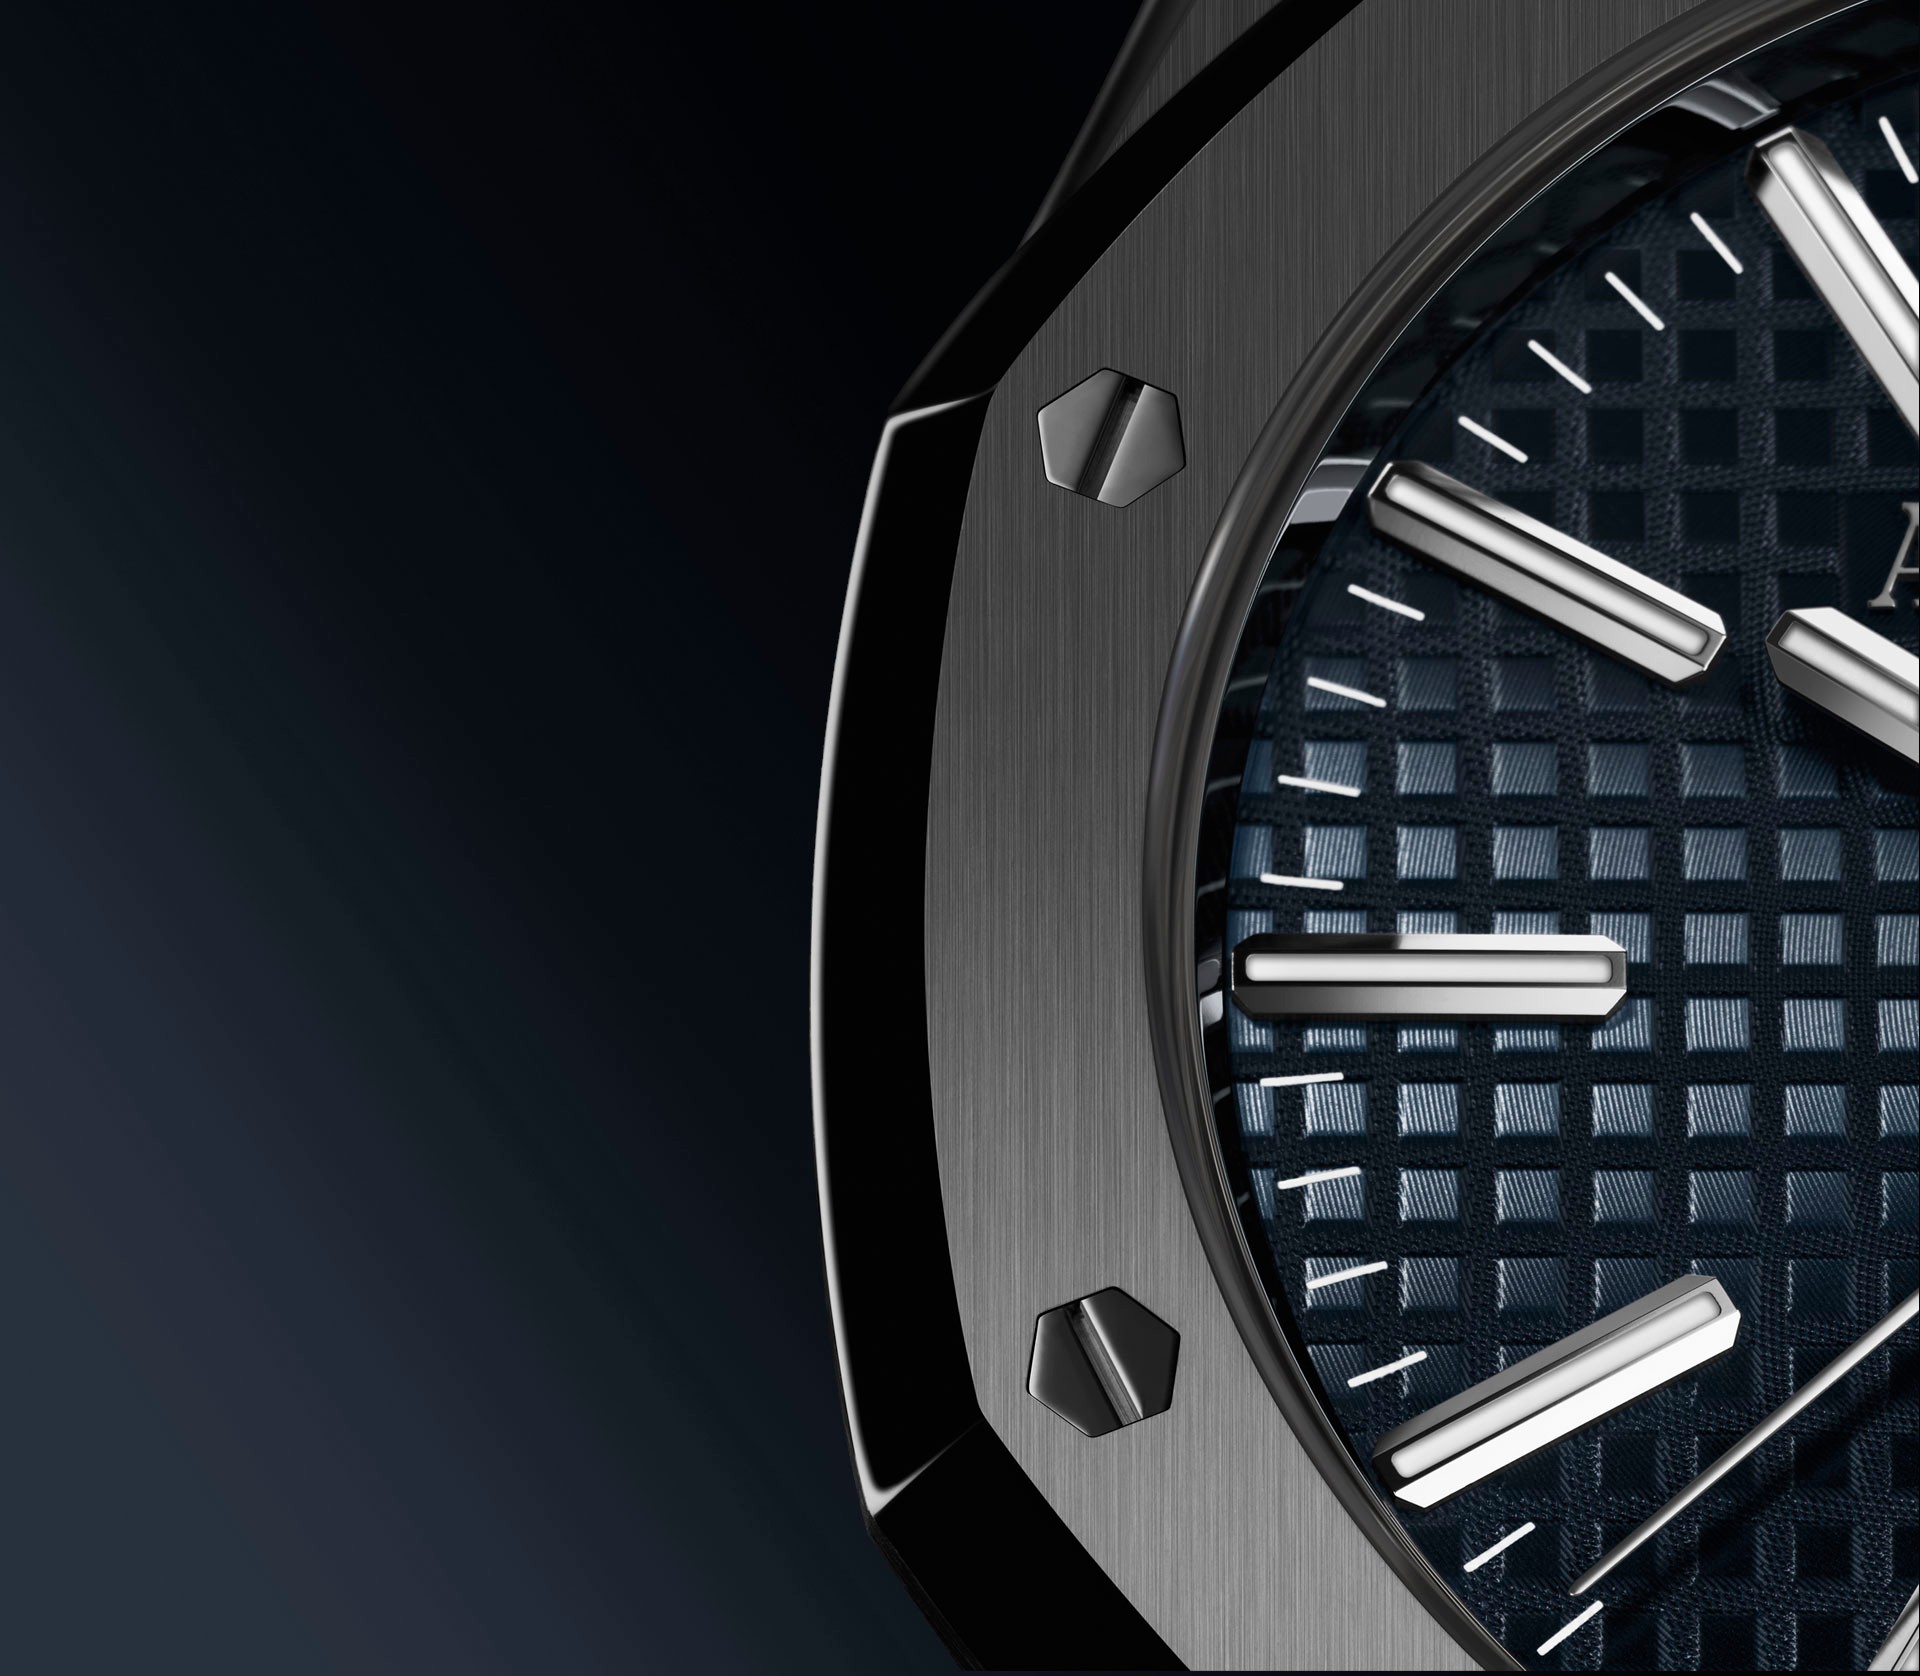 Audemars Piguet toasts 30 years of Royal Oak with new watch